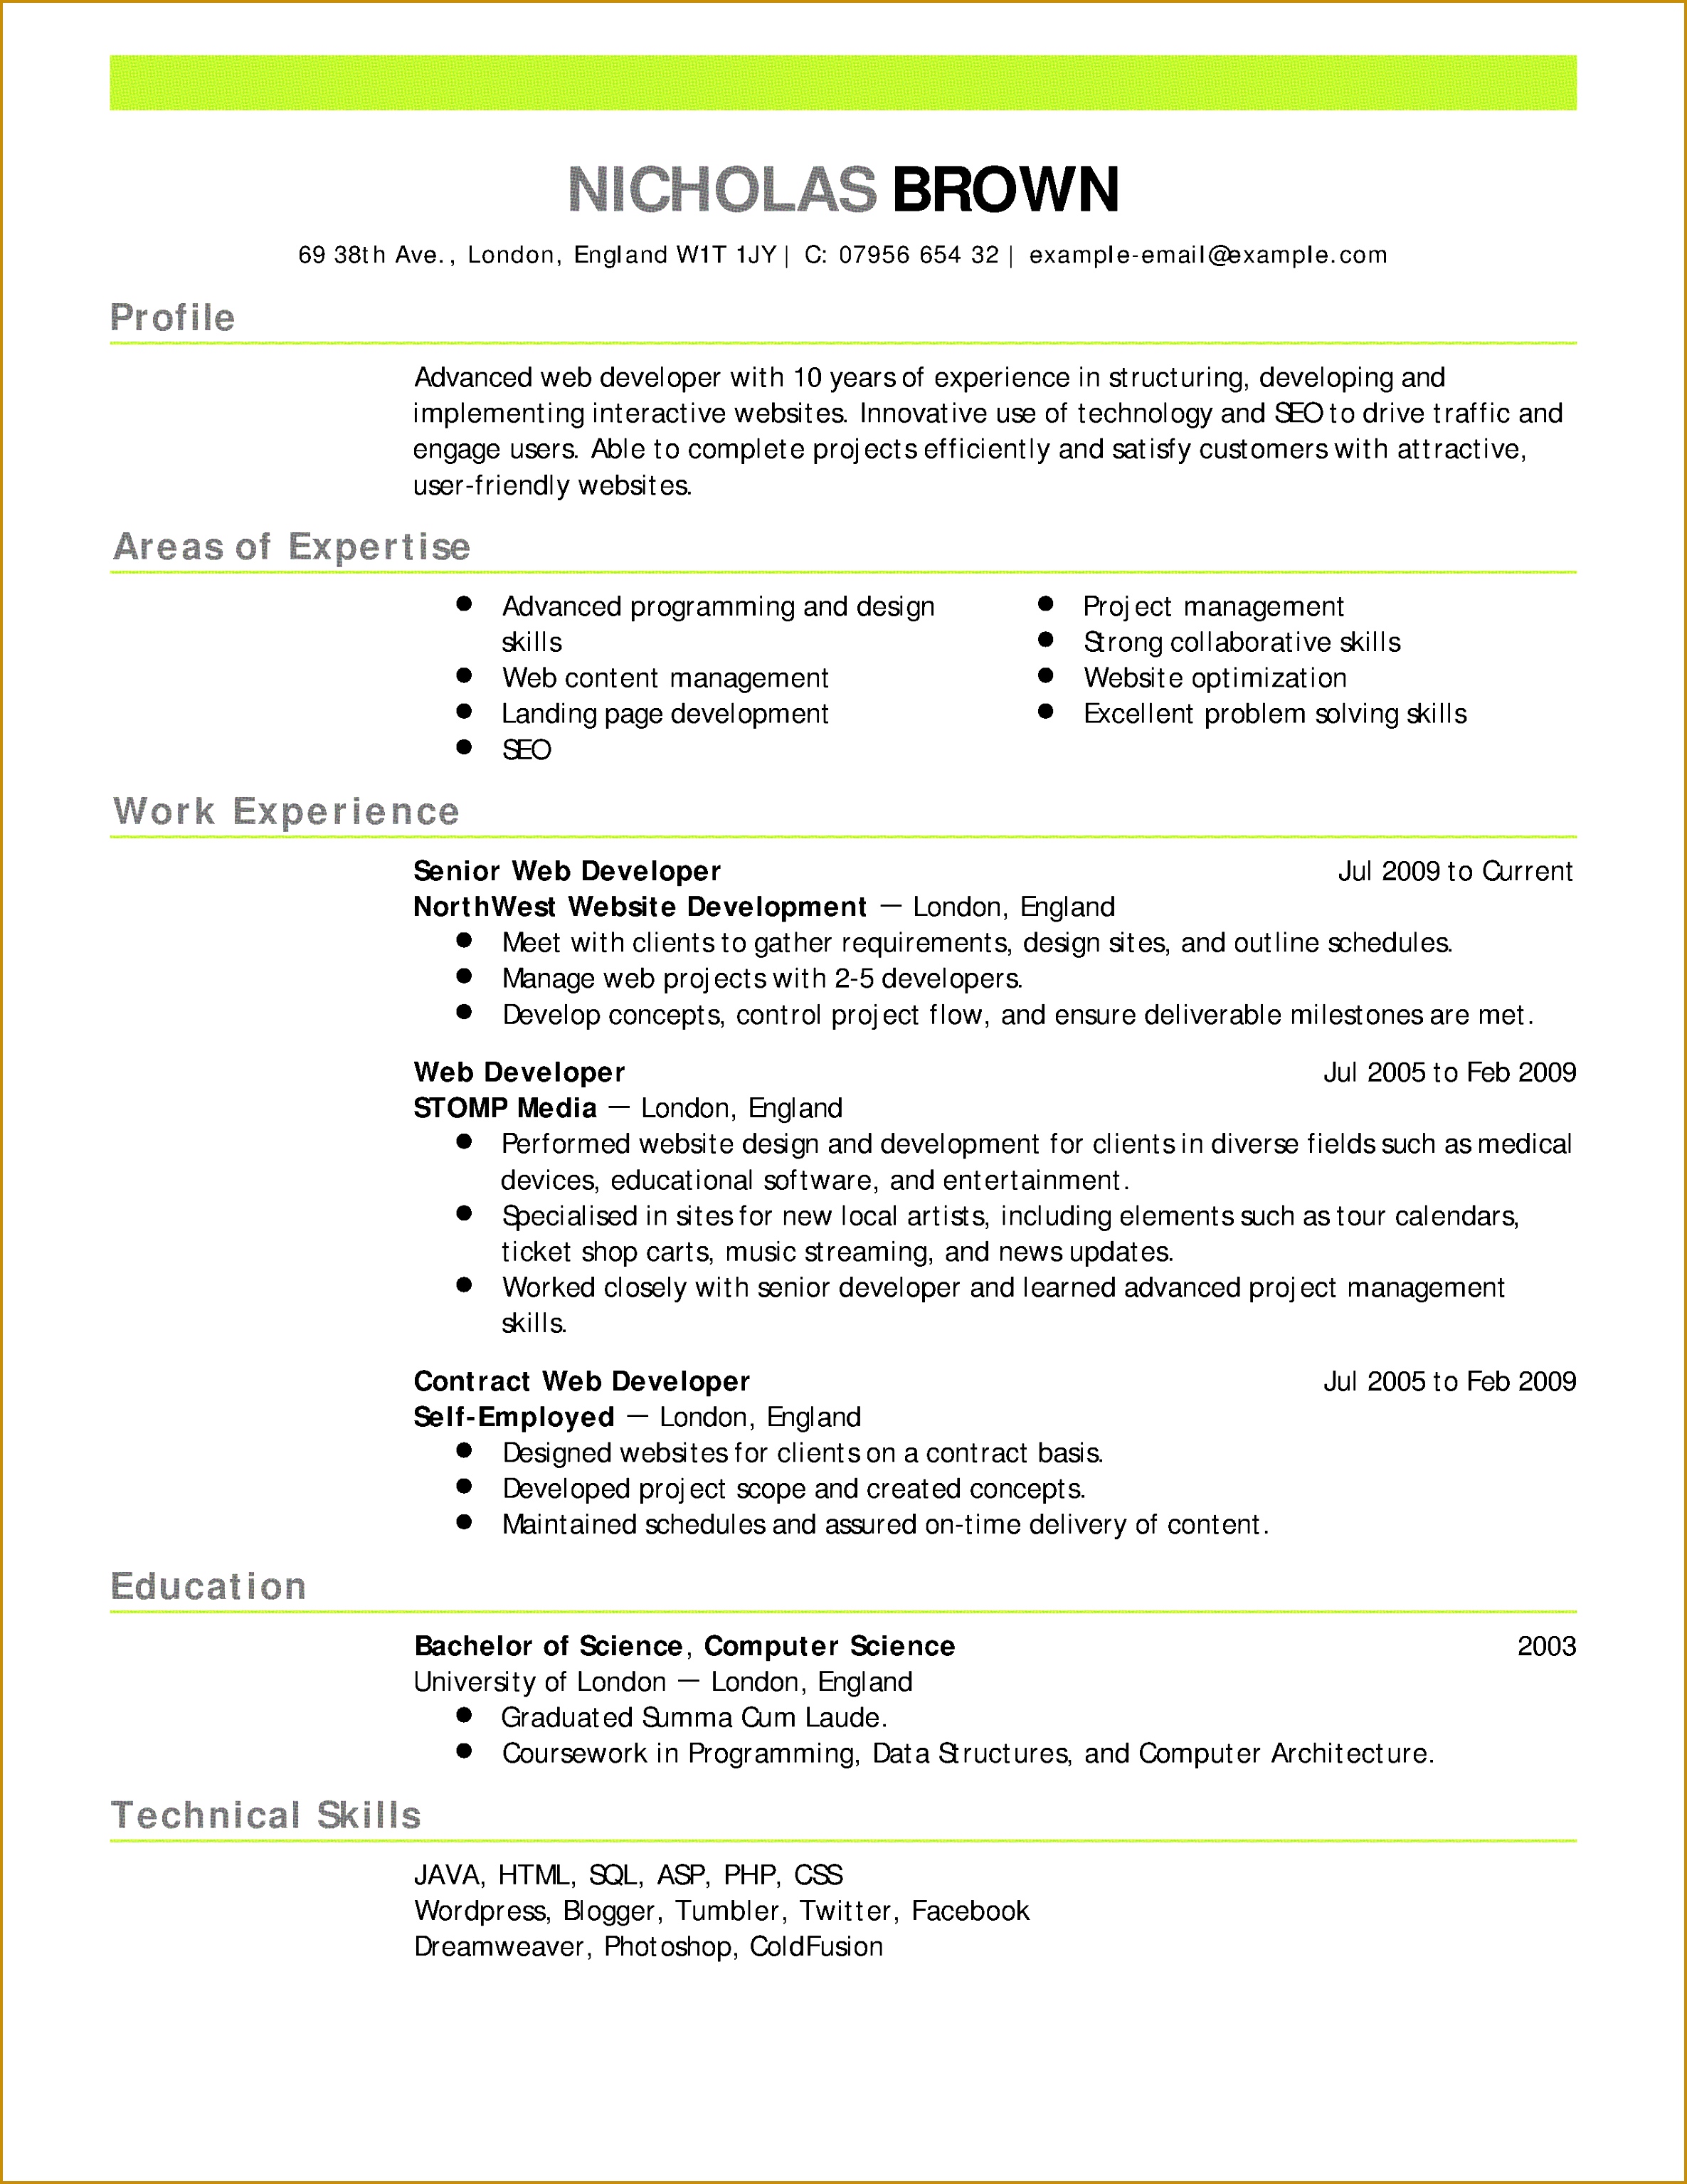 Date Birth format In Resume Unique Professional Job Resume Template Od Specialist Cover Letter Lead 30692371